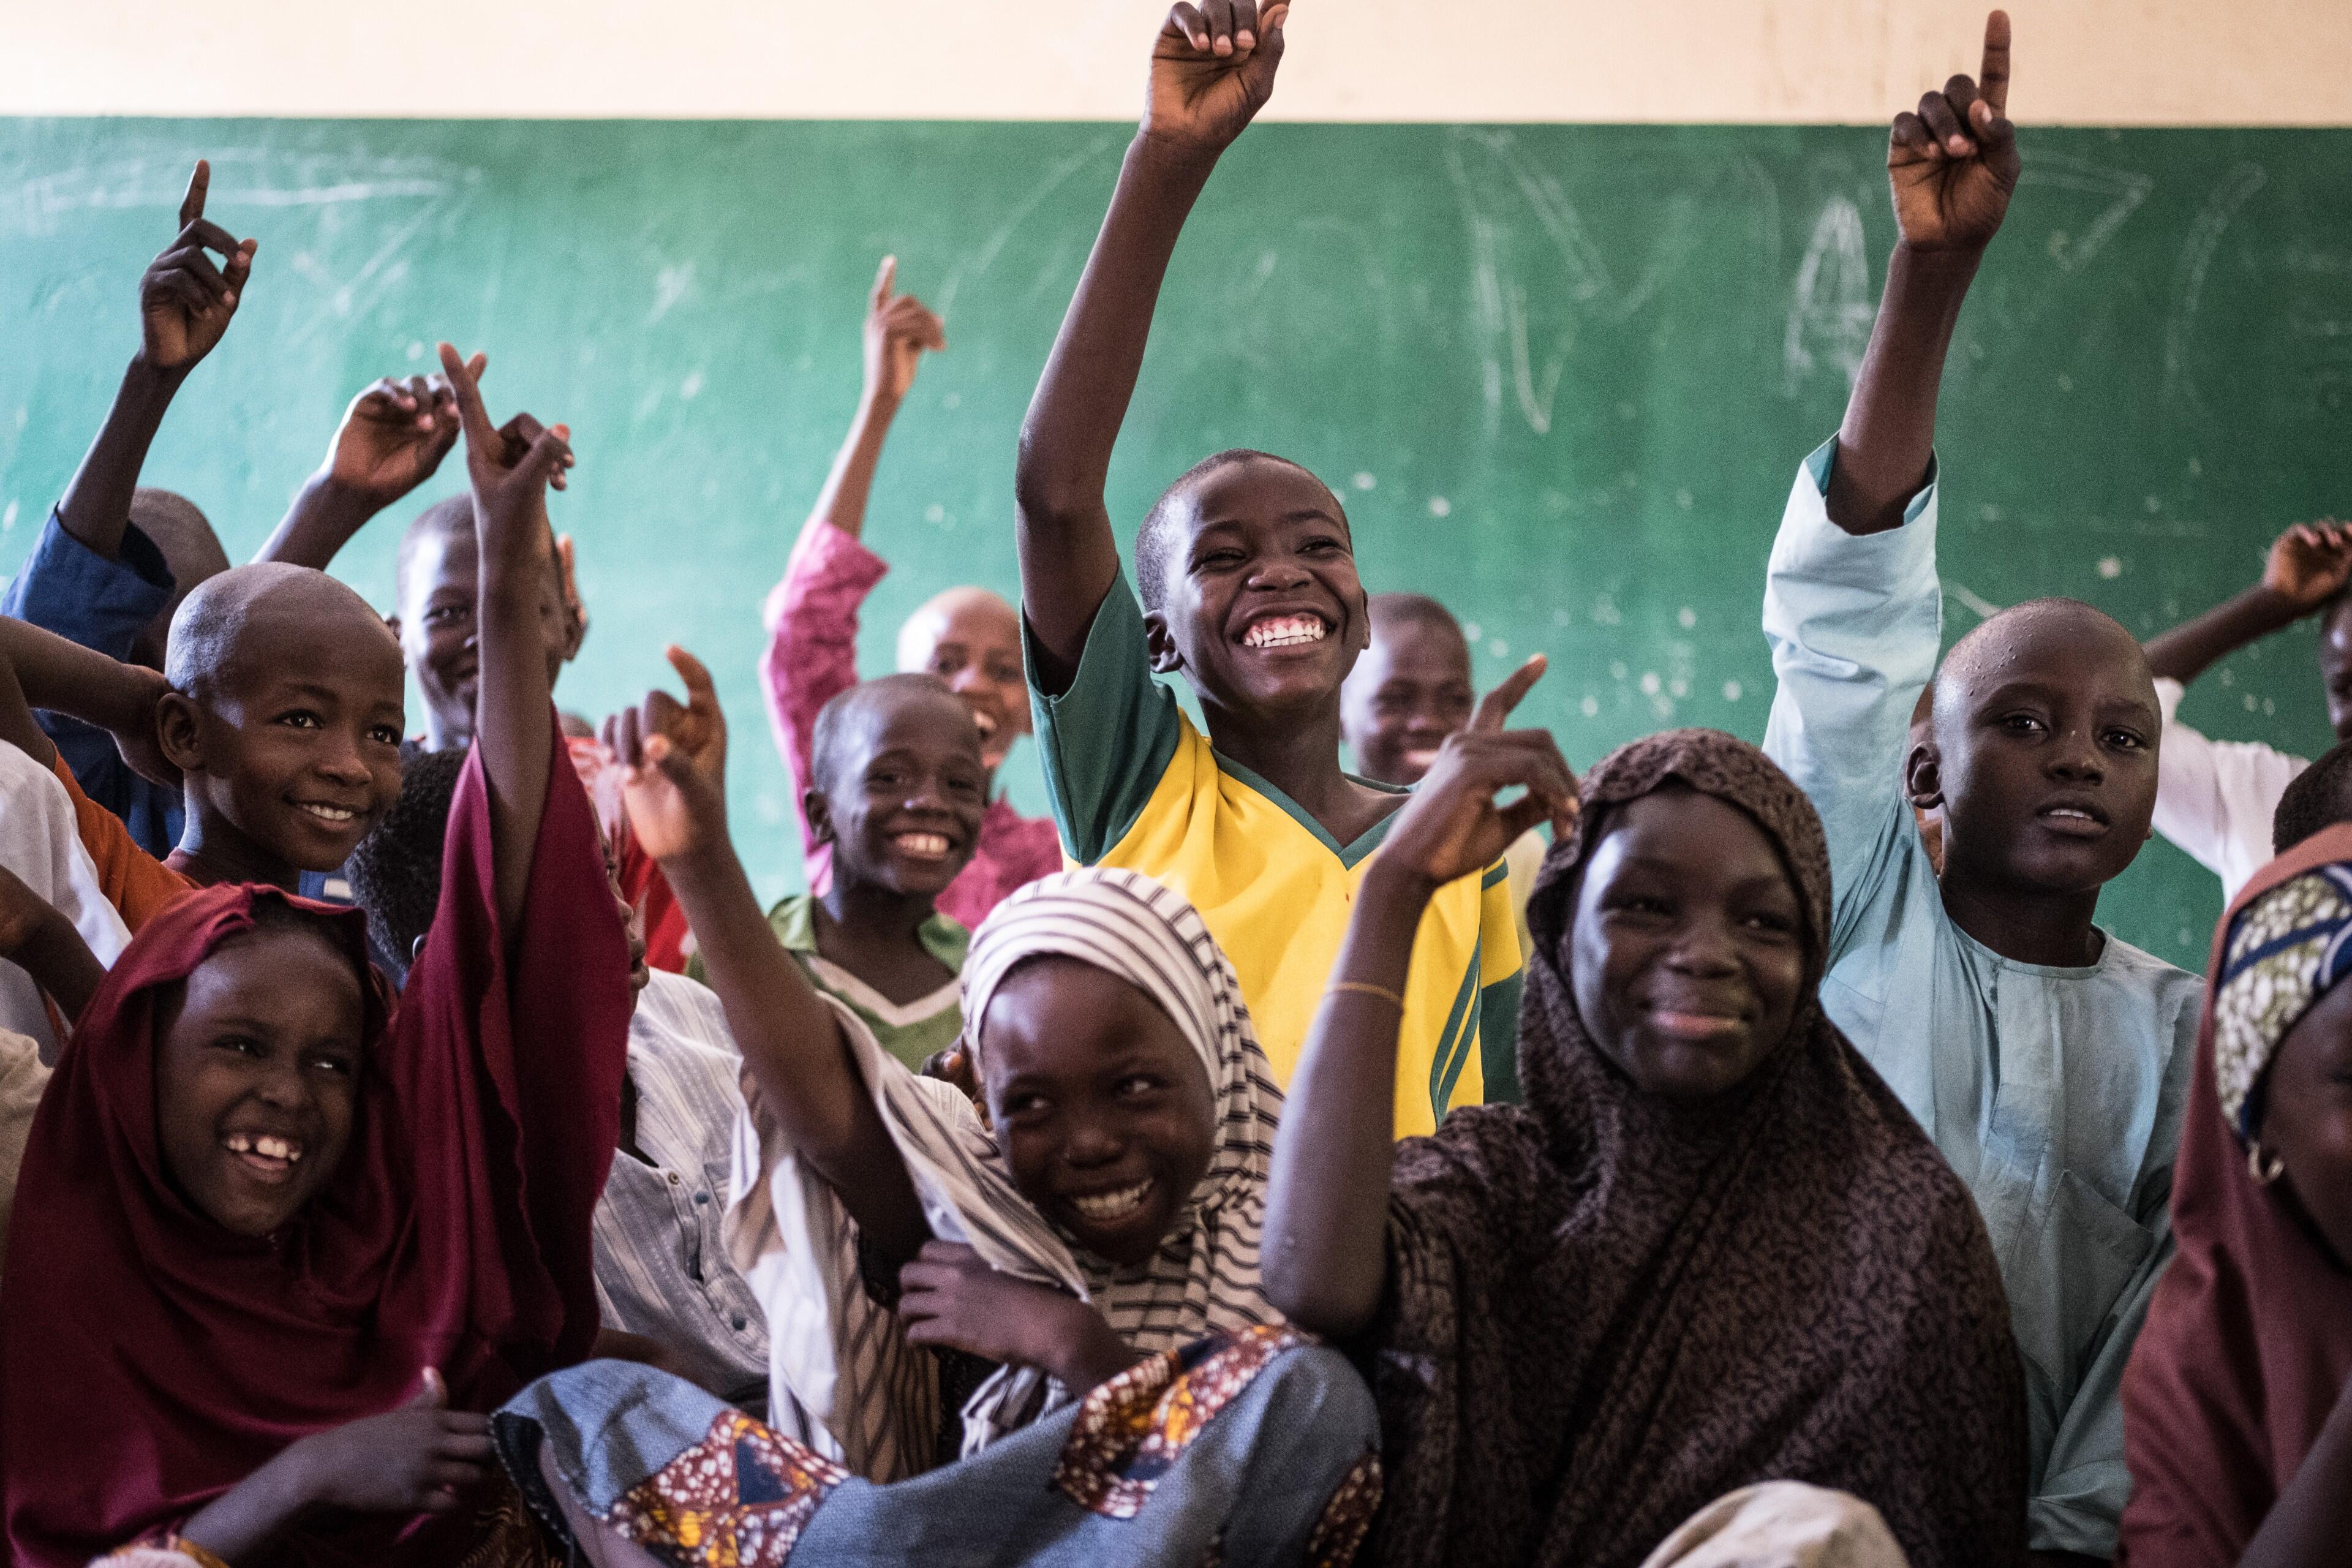 Students excitedly raise their hands in class at an International Rescue Committee supported school in Nigeria.